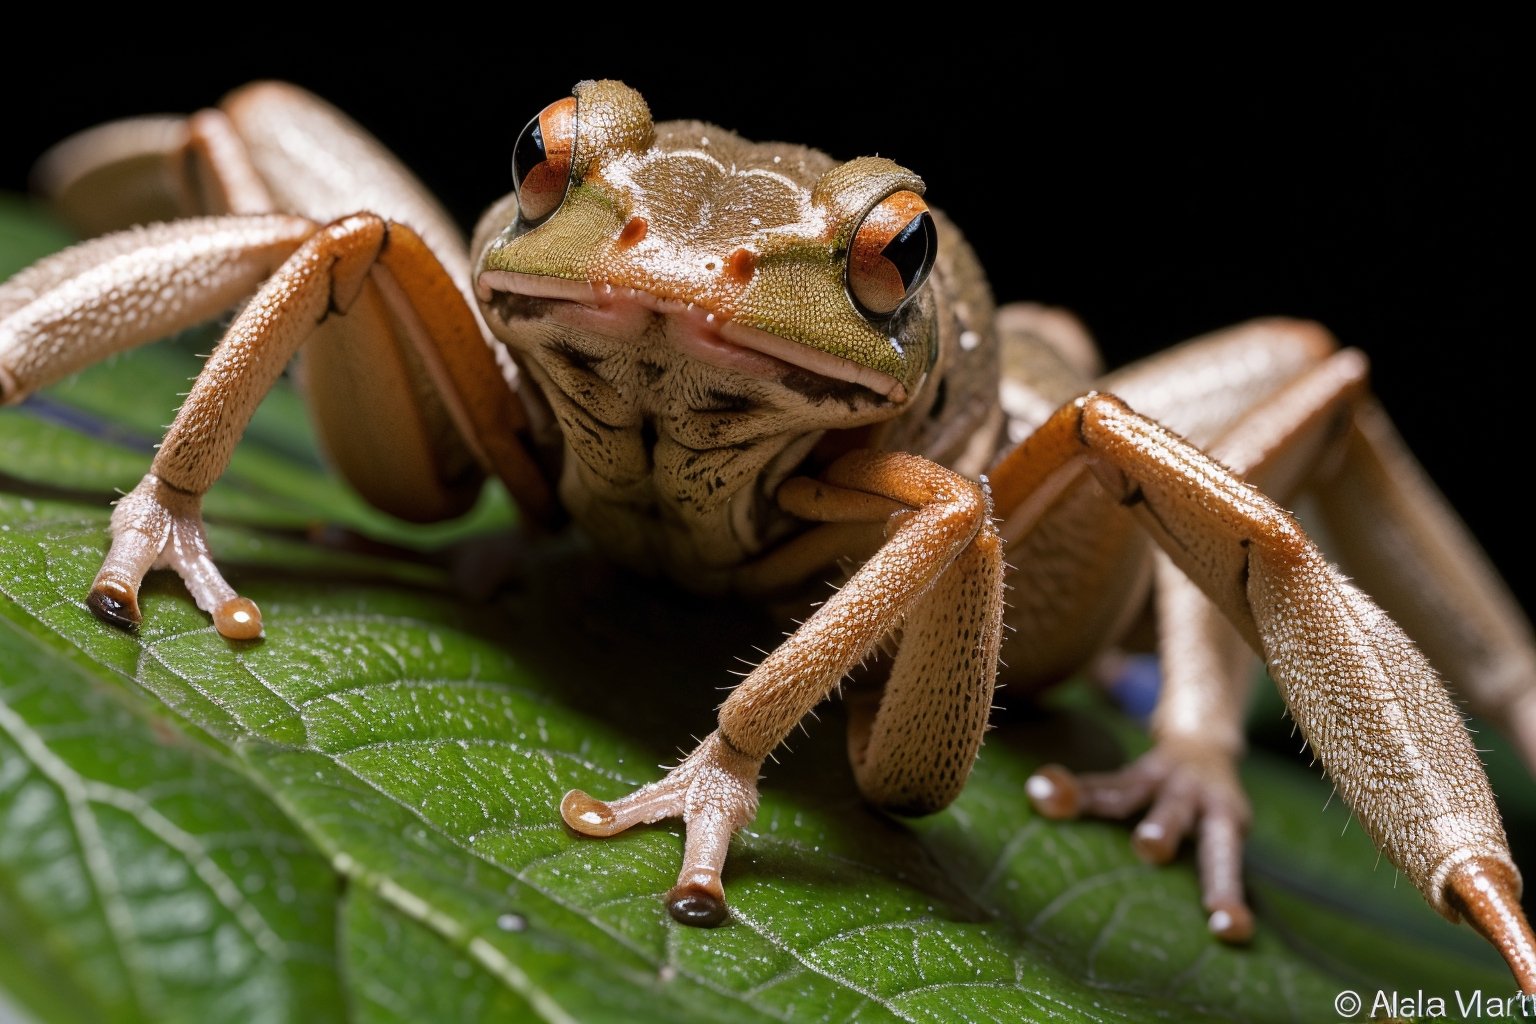 (best quality, 8K, ultra-detailed, masterpiece), (ultra-realistic, photorealistic), A Wolf Spider body, hair, 6 eyes, and 8 legs but with bright and vibrant coloing of a Red-Eyed Tree Frog's skin and eye colors and textures.  The body will be that of a Wolf Spider with eight legs, 6 eyes, and long hair, but the Wolf Spider will not have any brown skin tones or black eyes with the Wolf spider's normal colors  replaced with the vibrant and colorful skin color of a Red-Eyed Tree Frog.  The jaws of the spider are prominent and strong and will be present but instead of brown toned they will have the colorings of the Tree Frog.  Ensure meticulous detail in the Wolf Spider's body, 8 legs, hair, 6 eyes but replace the Wolf Spider's normal brown tones with the Red-Eyed Tree Frog's skin vibrant color, and skin texture, and elegant movement. This artwork should capture the Wolf Spider's enigmatic nature, revealing its unique beauty with the Wolf Spider presence and body but with the Red-Eyed Tree Frog's colors with unparalleled realism. make the Wolf Spider a stunning and unforgettable subject showing the spider's anatomical body from head to toe but with the Red-Eyed Tree Frog's vibrant skin colors and eye colors.  The background will be obviously in the Wolf Spider's natural habitat. The surface in the Spider's natural habitat's texture will be in impressive detail and realism. 